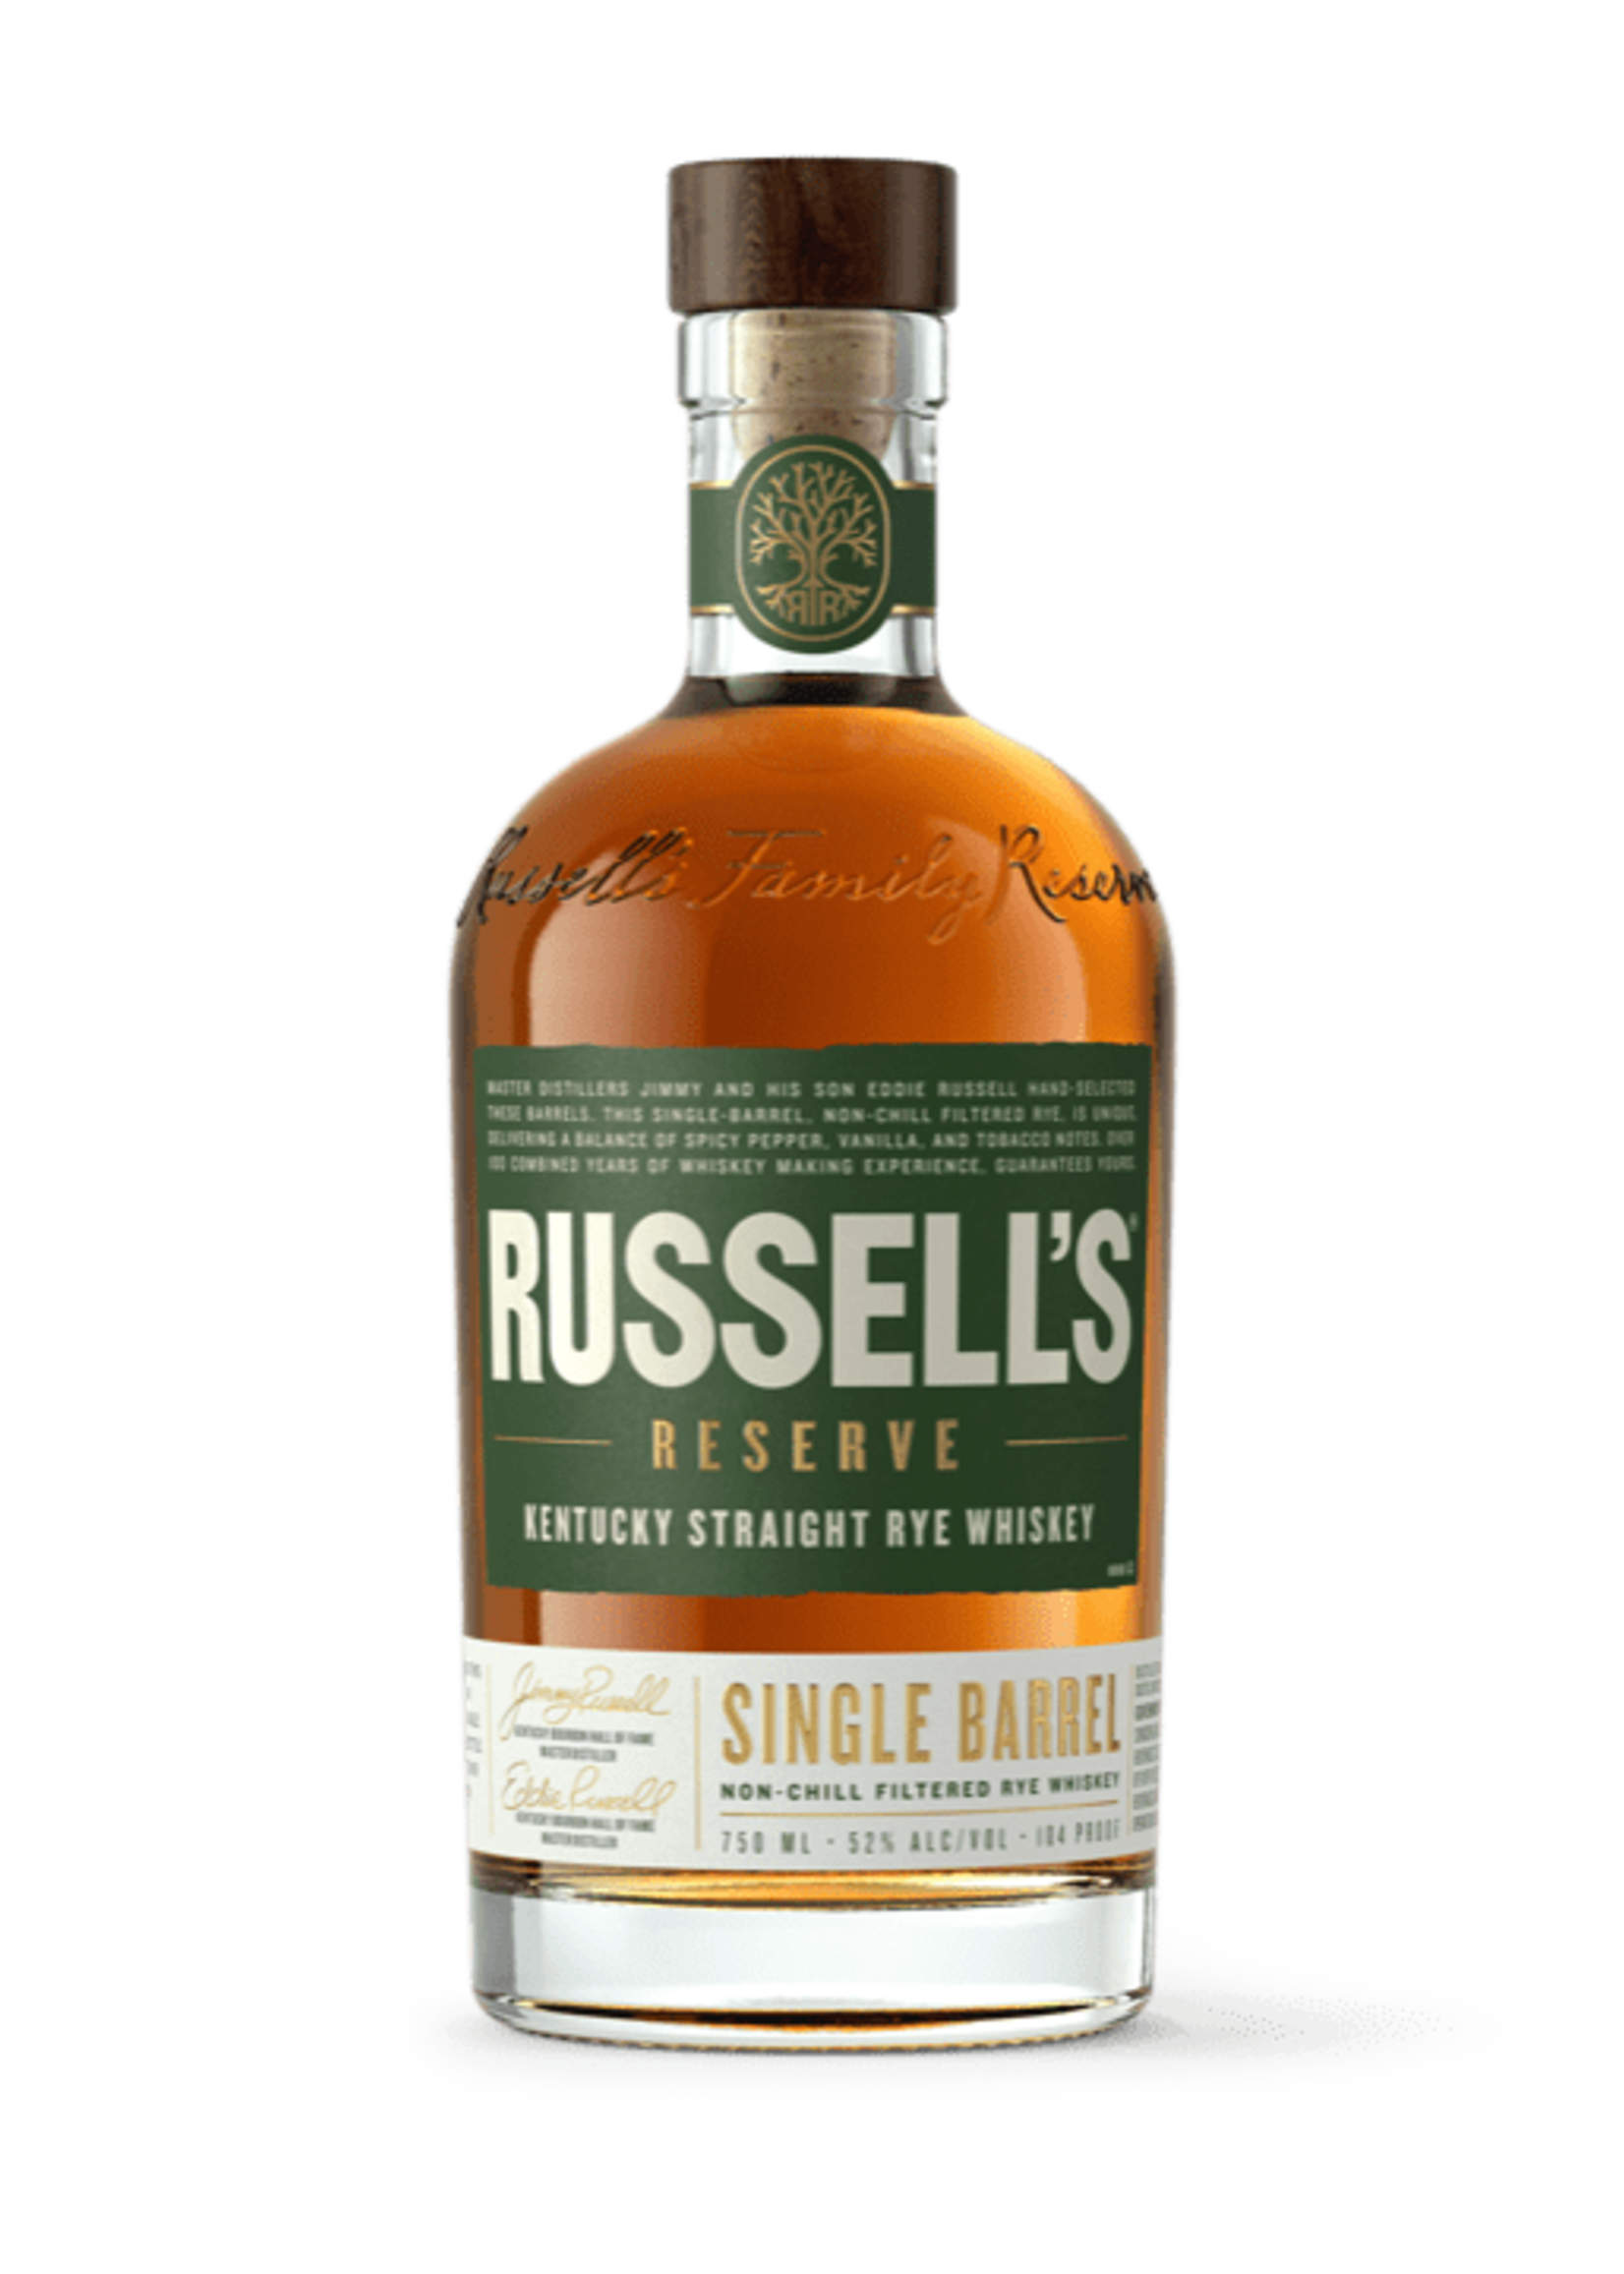 Russell's Reserve Russell’s Reserve / Single Barrel Rye Whisky 52% abv / 750mL